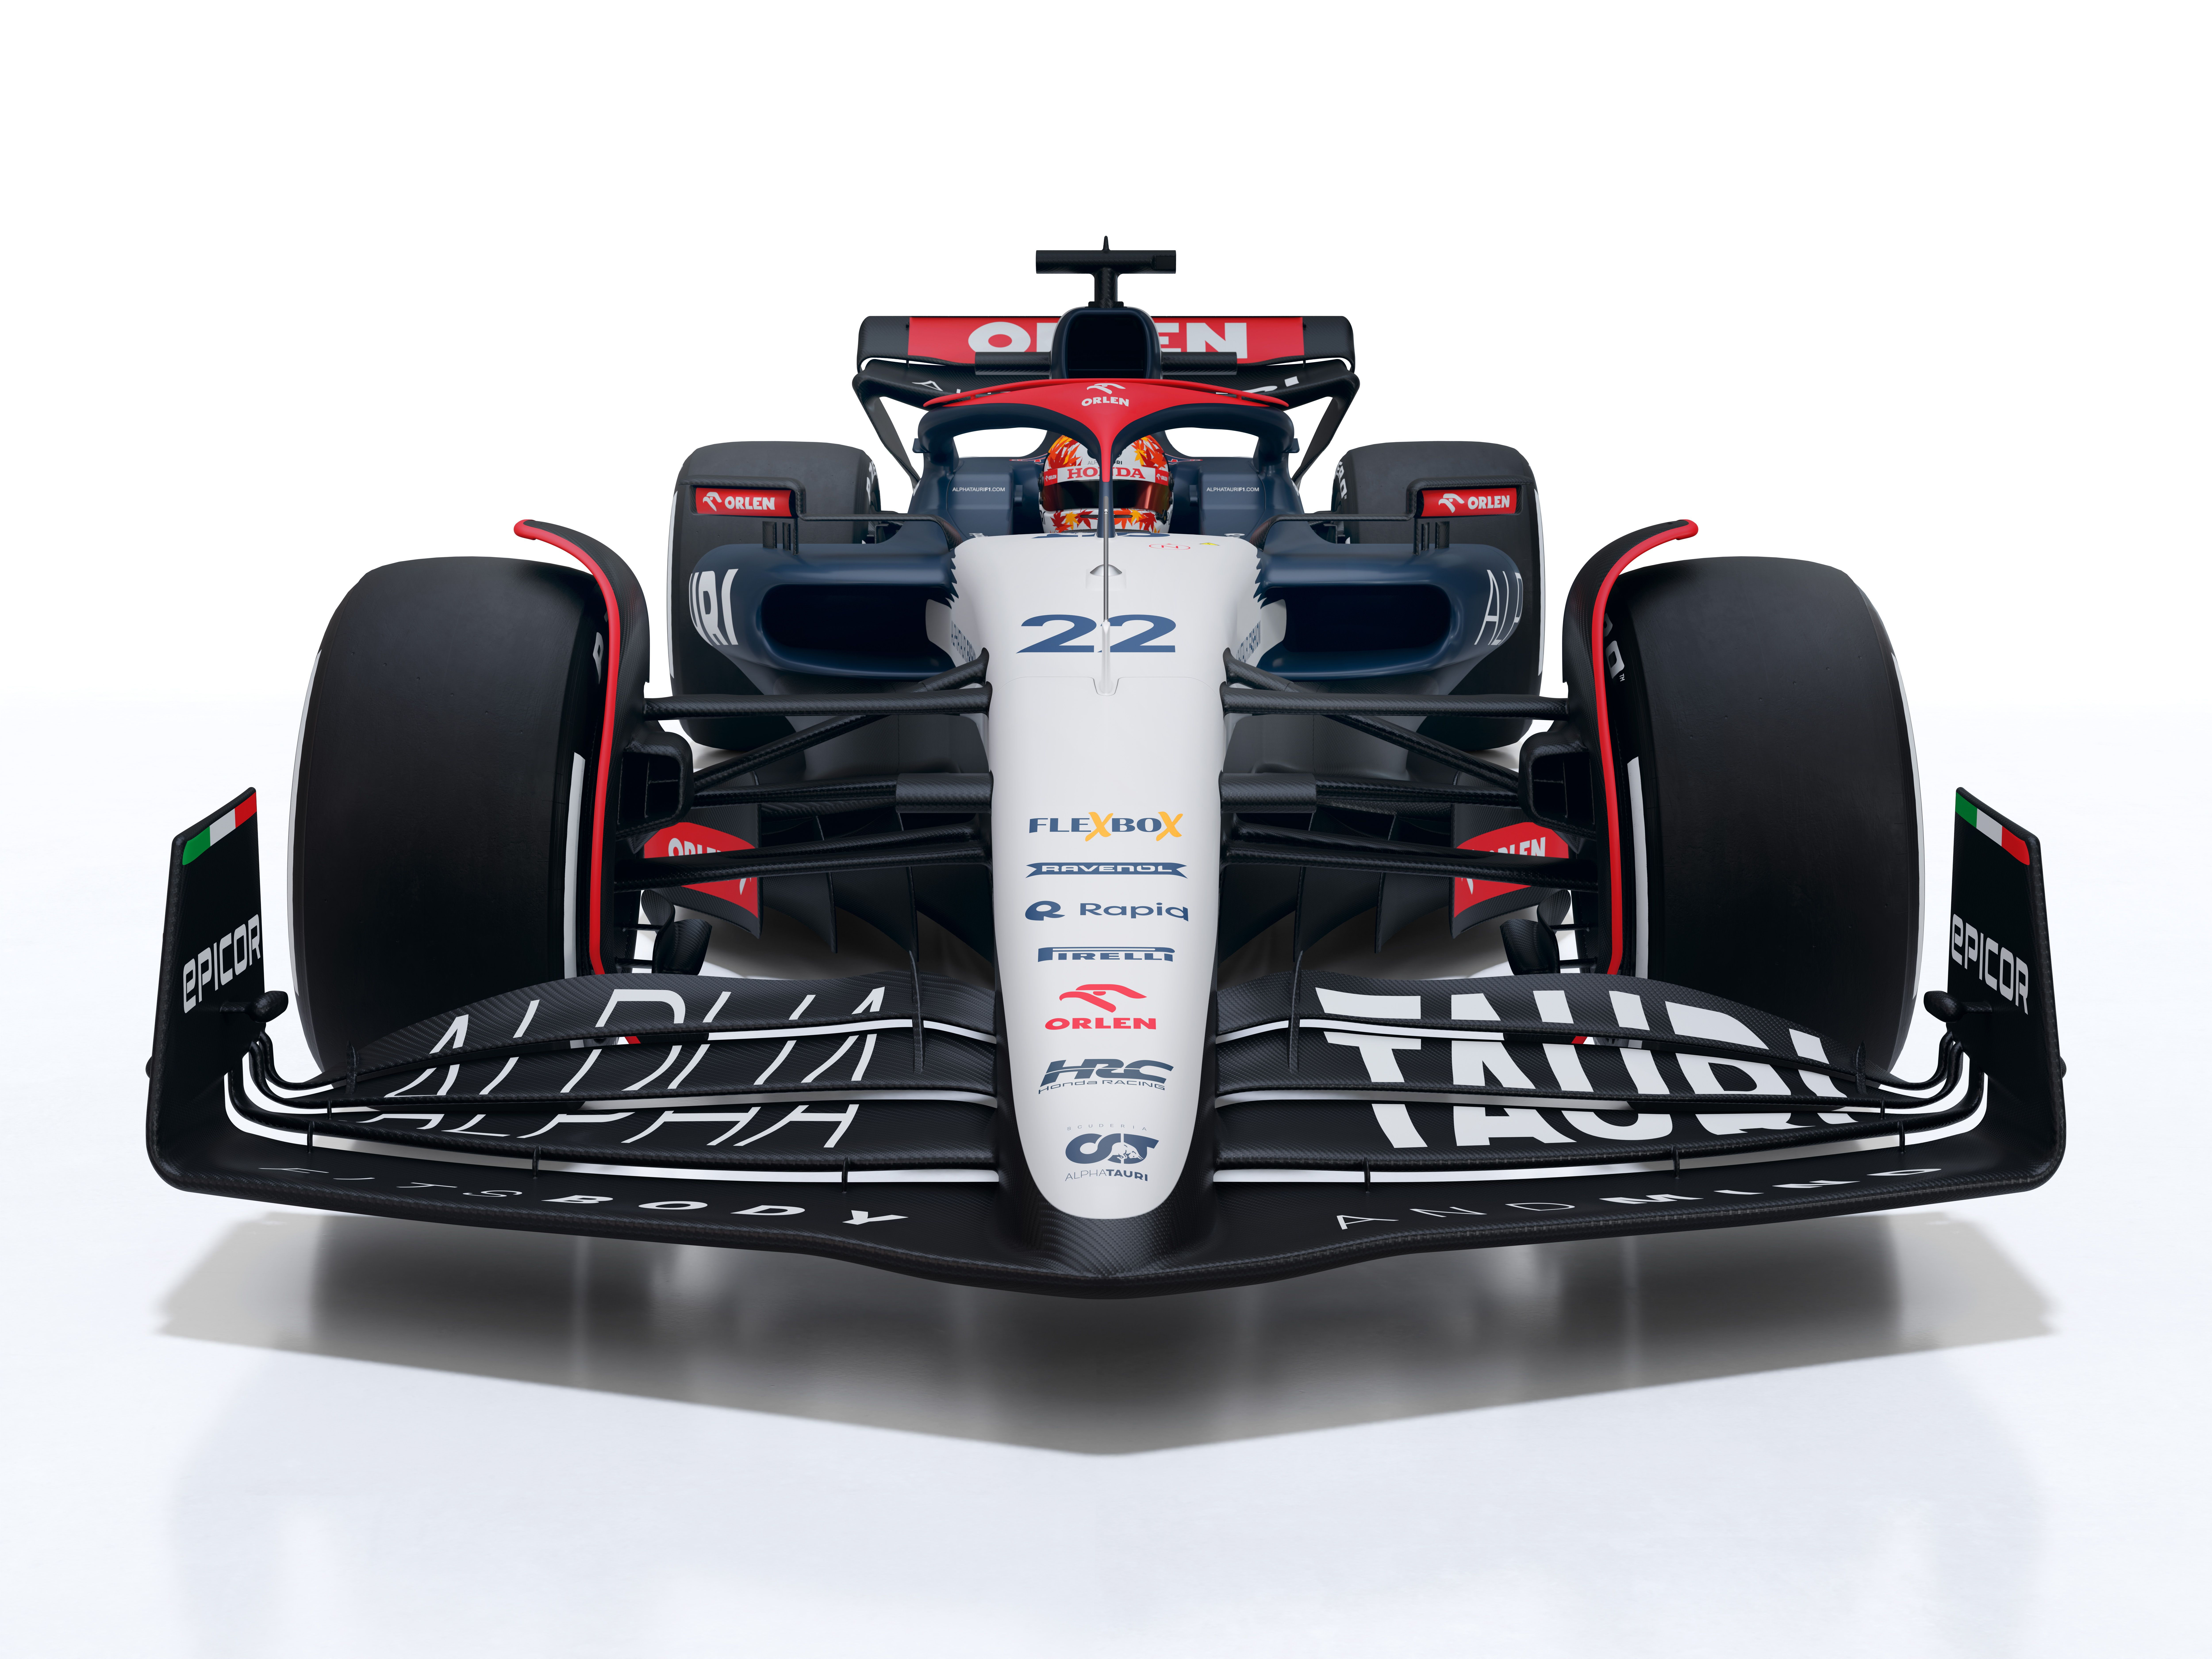 Red Bull Racing hints at potential new livery for 2023 car